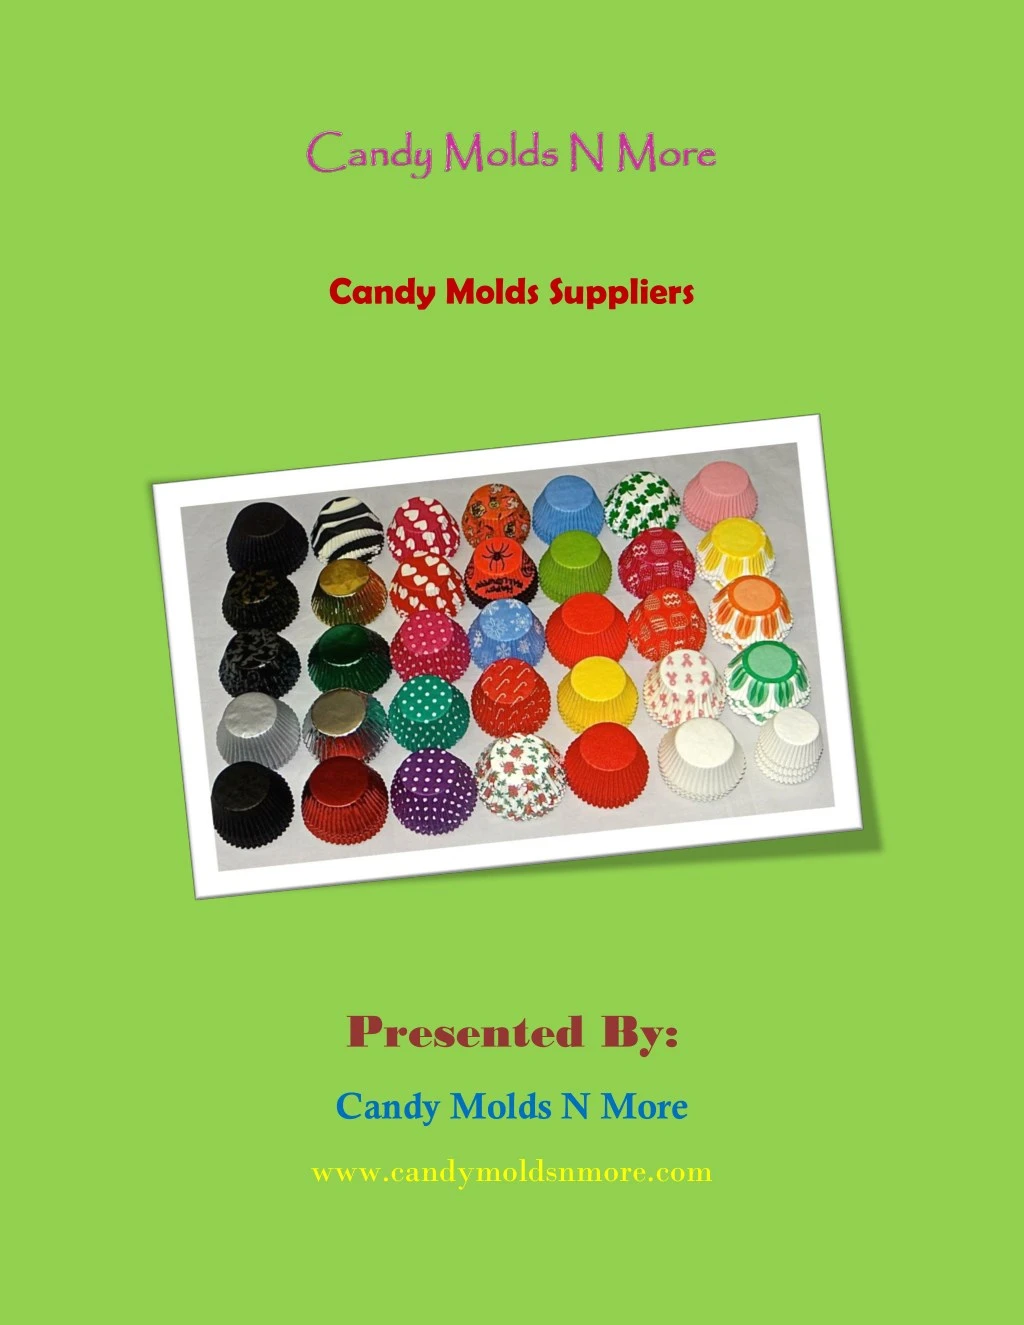 candy molds suppliers